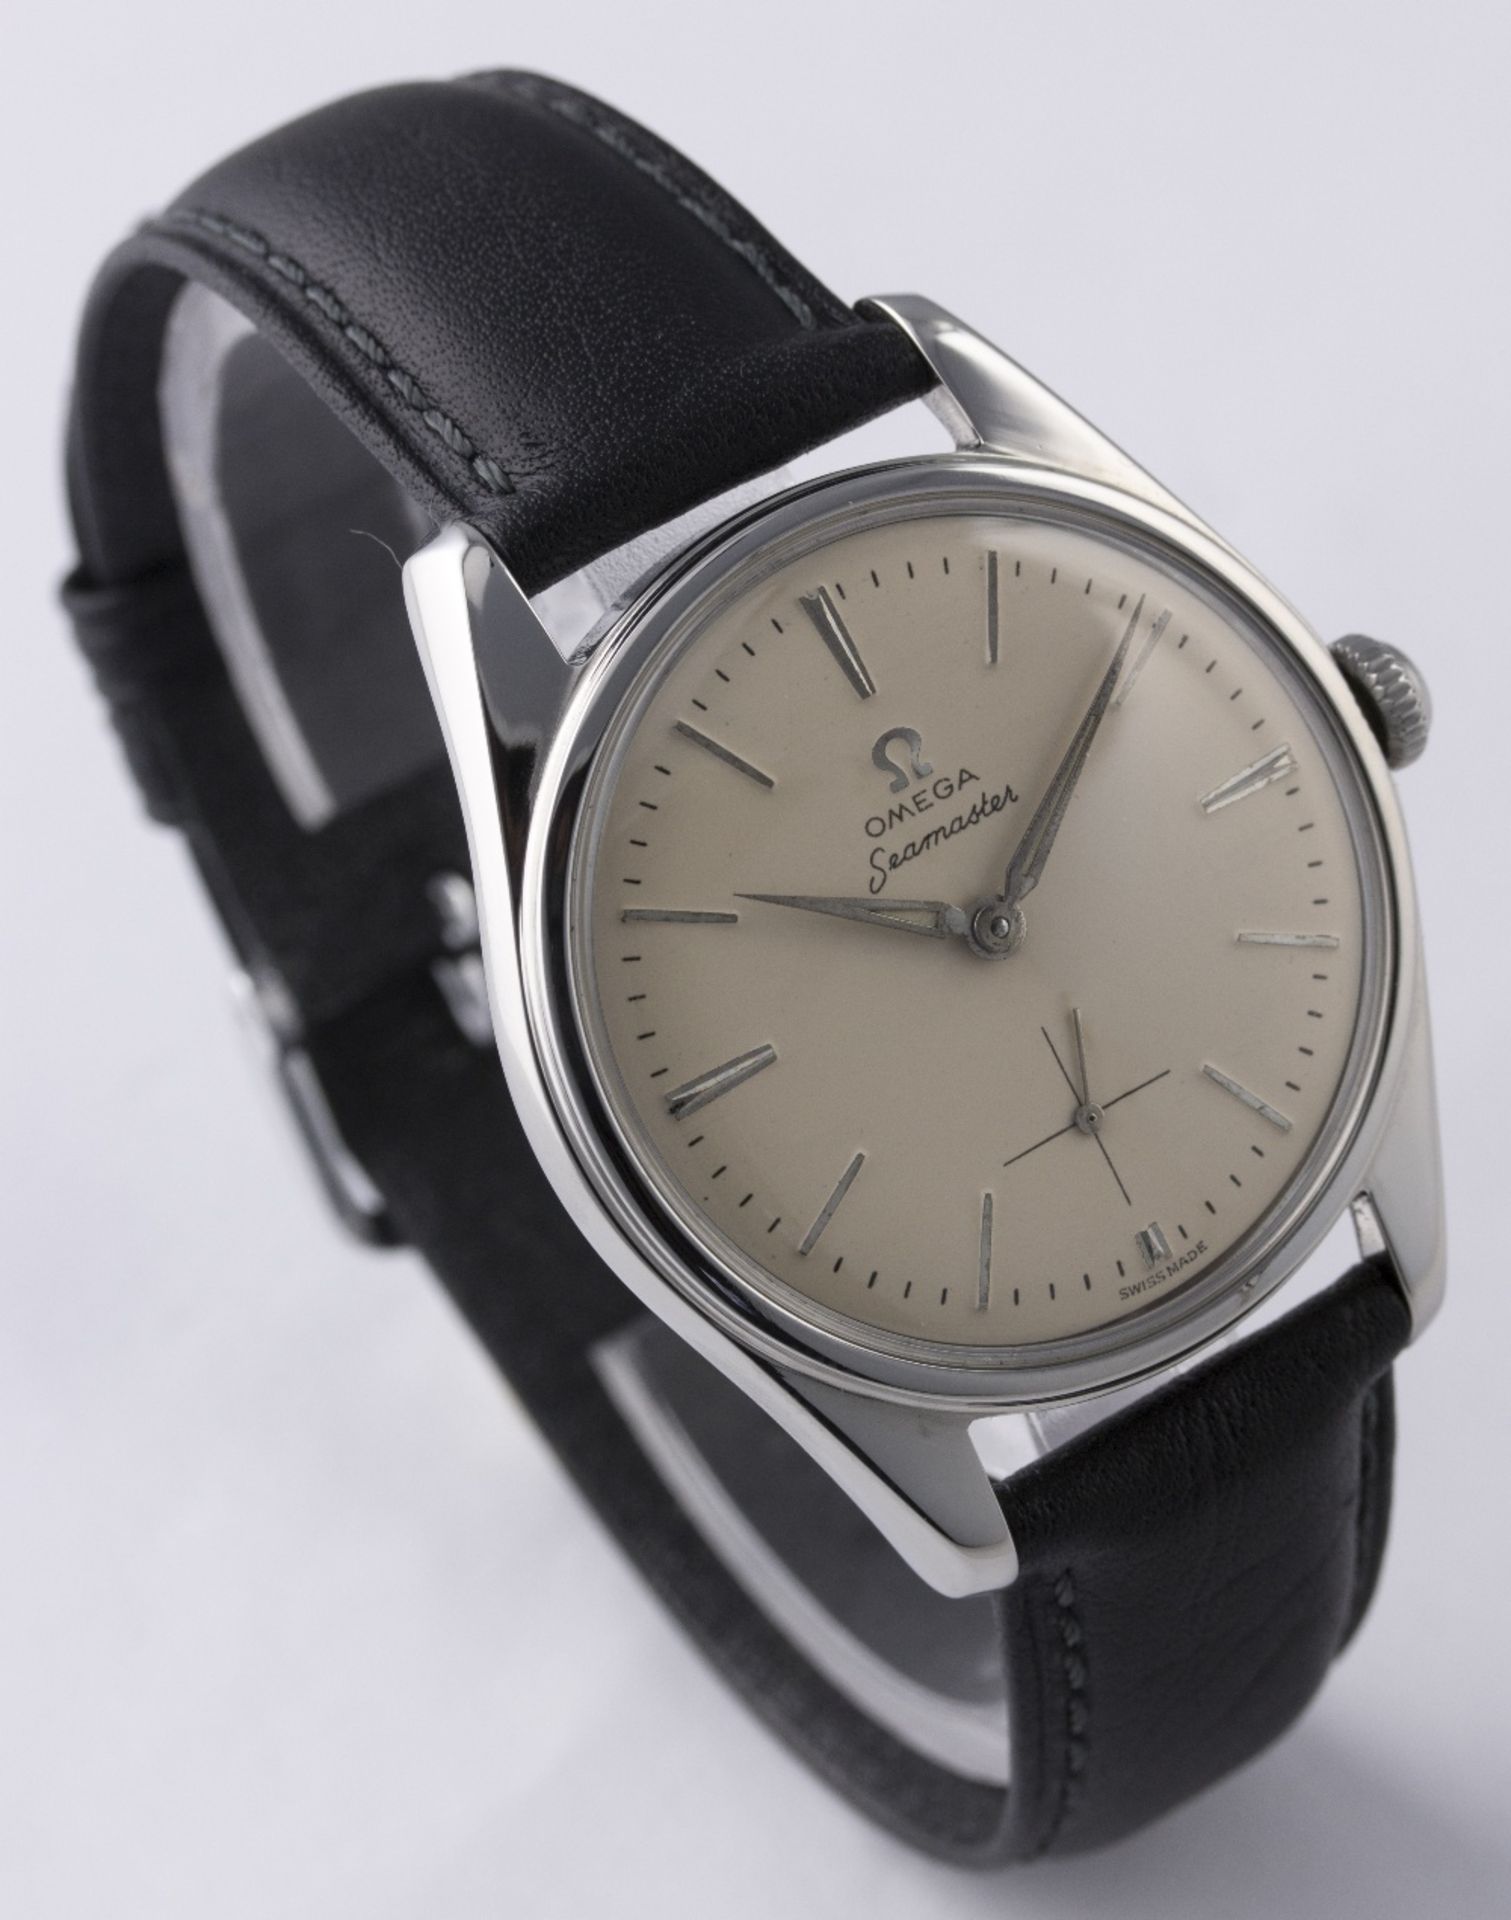 A GENTLEMAN'S LARGE SIZE STAINLESS STEEL OMEGA SEAMASTER WRIST WATCH CIRCA 1960, REF. 2990-1 - Image 5 of 8